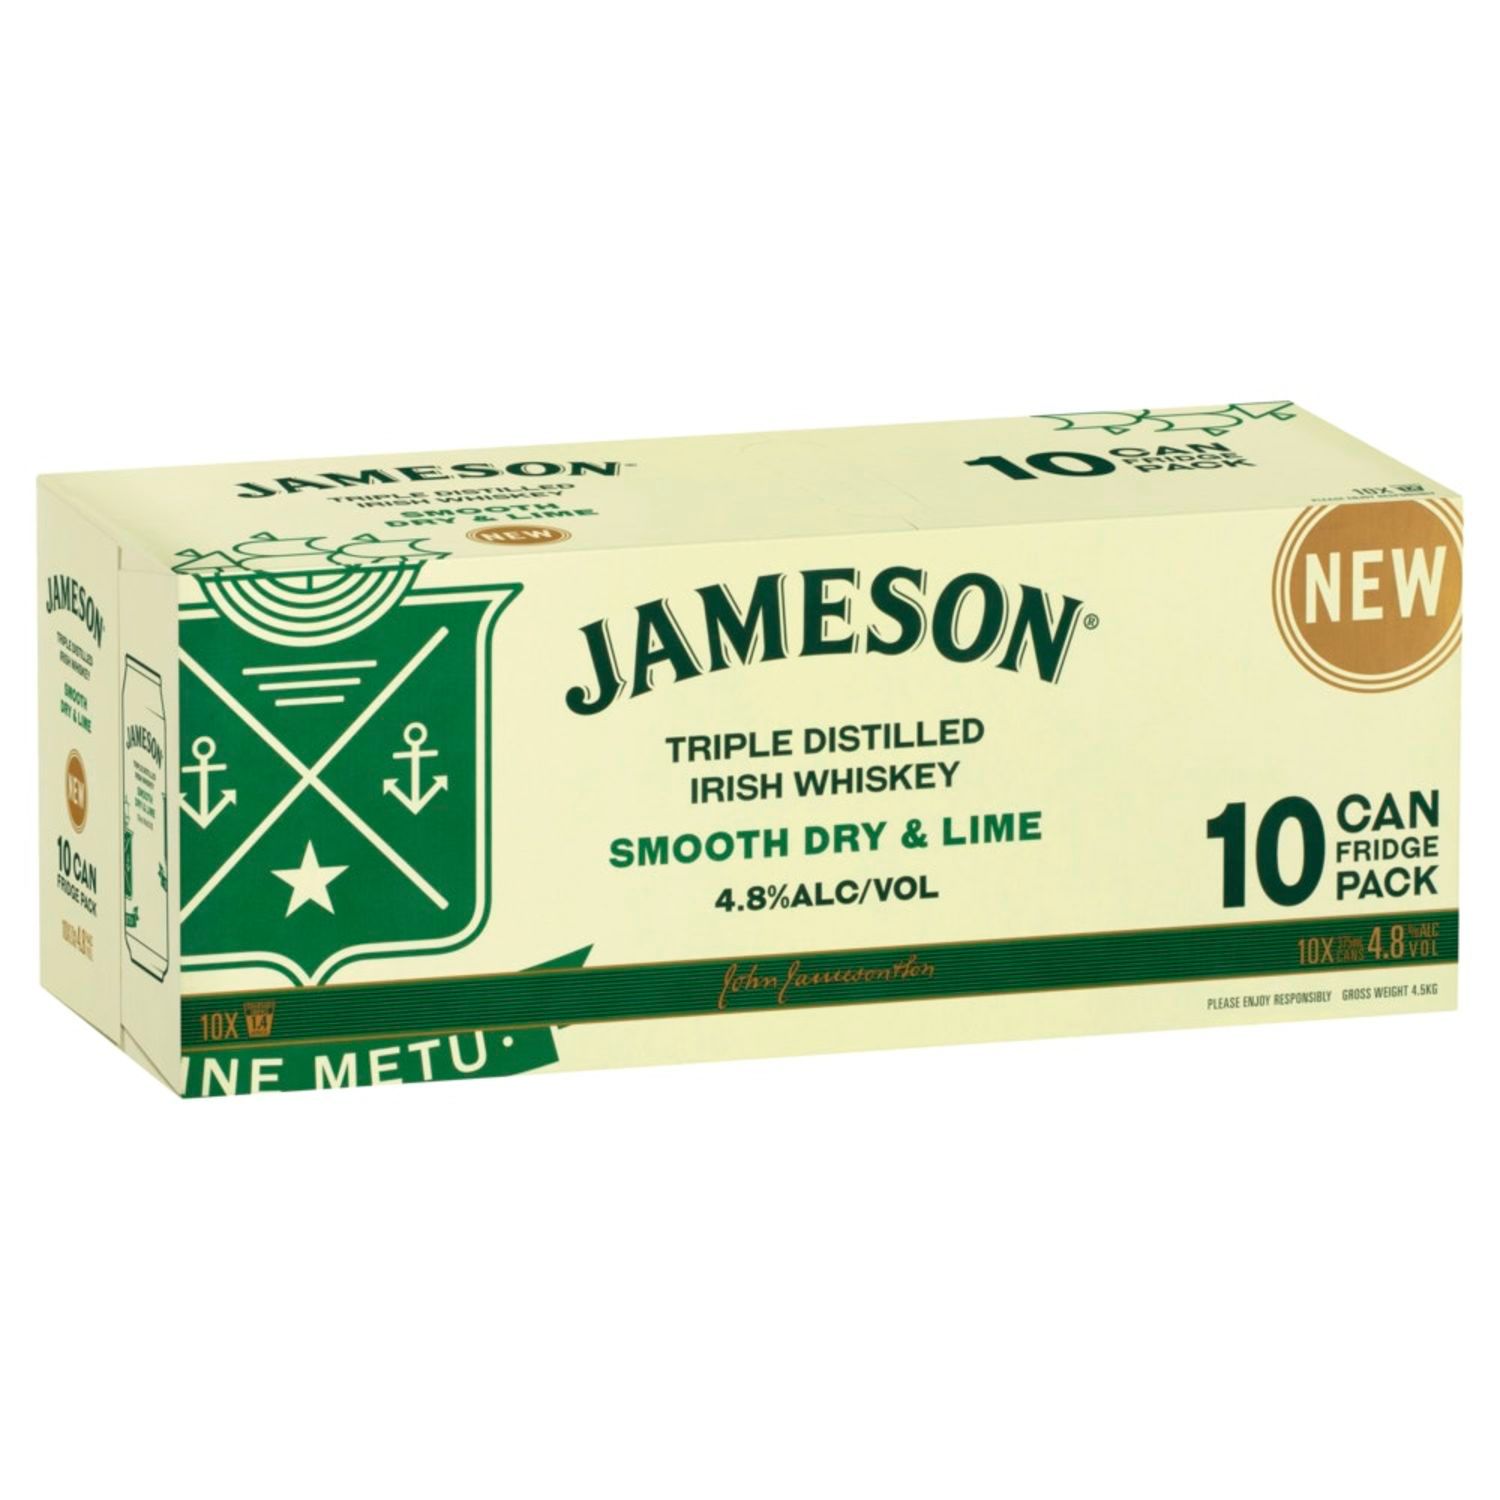 Jameson Smooth Dry & Lime 4.8% Can 375mL 10 Pack